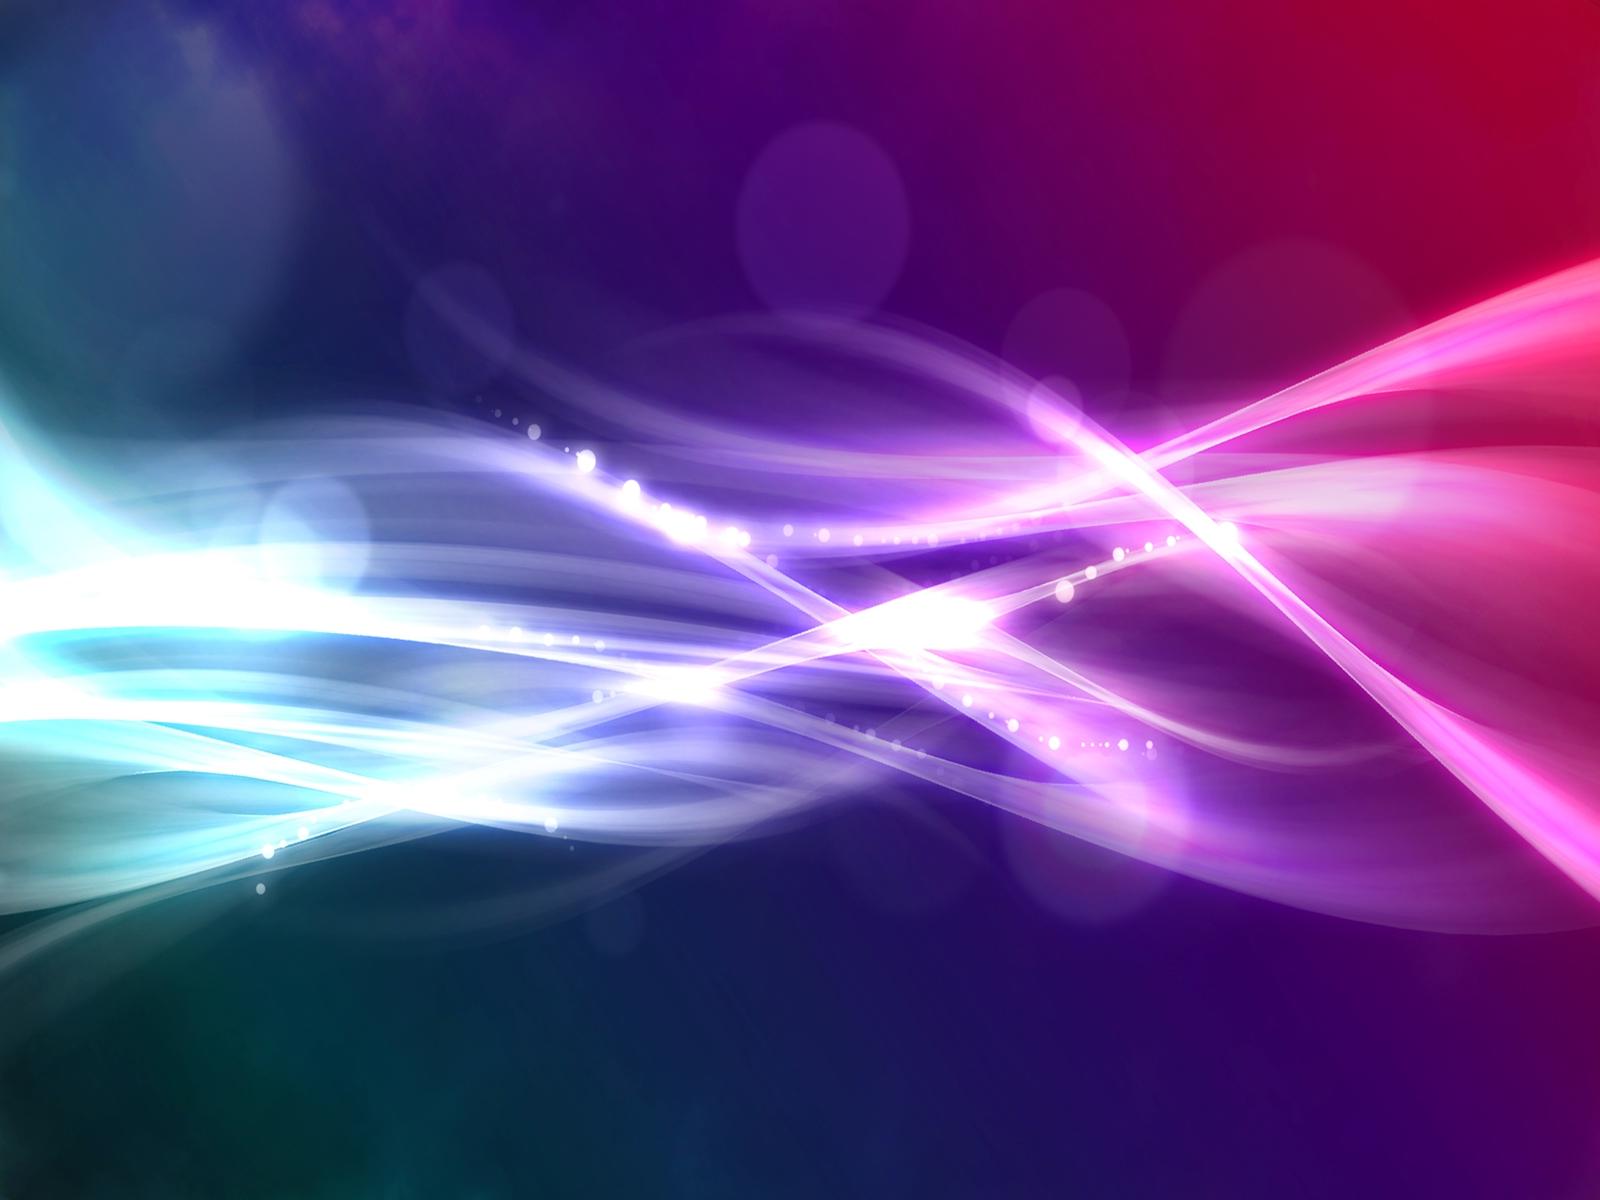 Abstract 2 | Free HD Backgrounds And Wallpapers